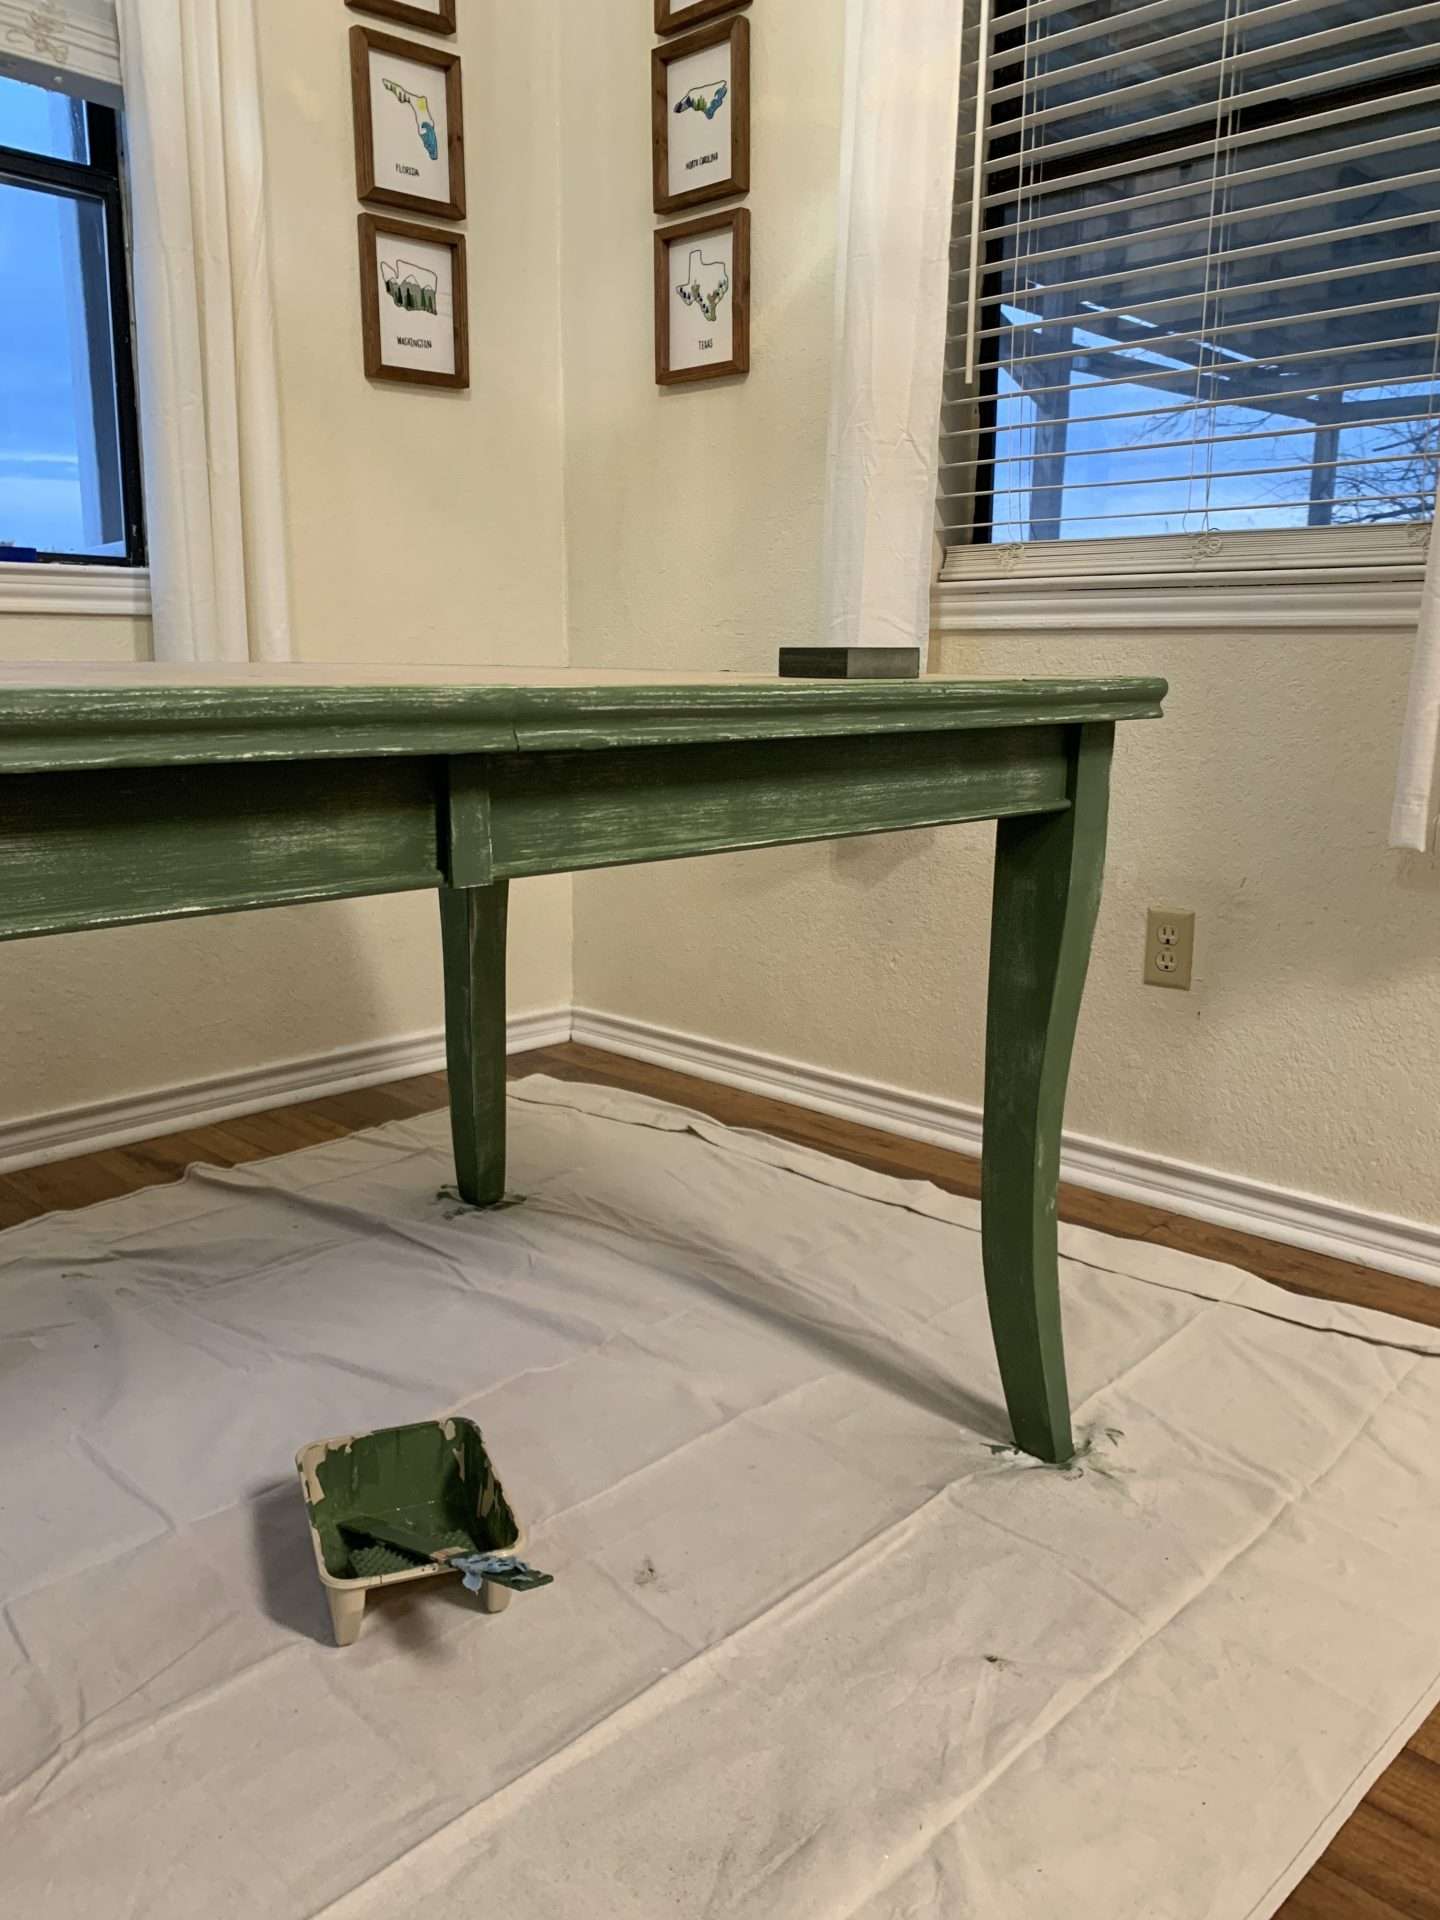 Painting a dining room table after 1 coat of paint.